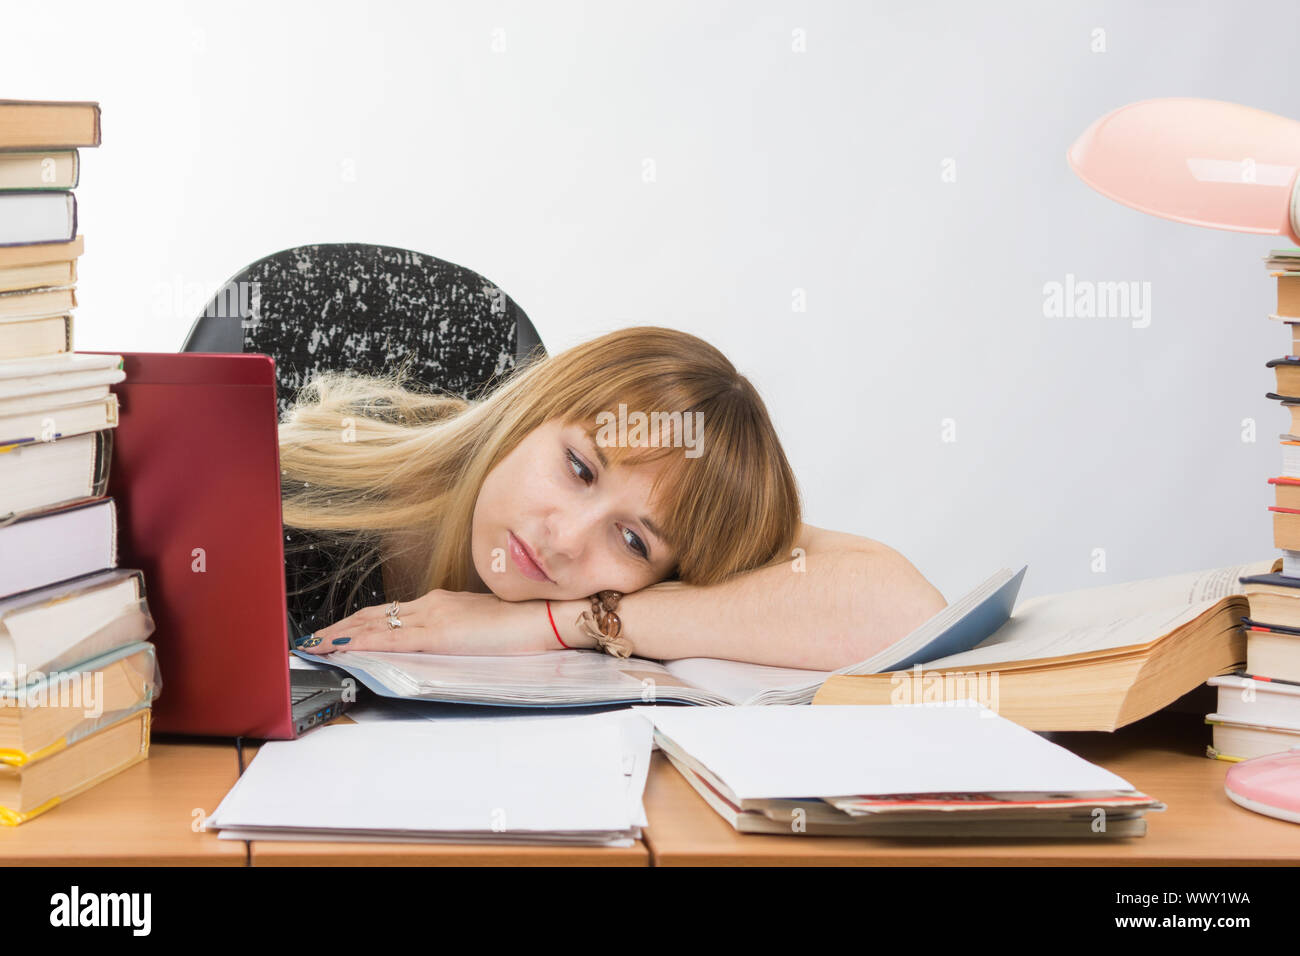 Girl student laid her head on her hand crammed with books and papers lying on the desktop Stock Photo